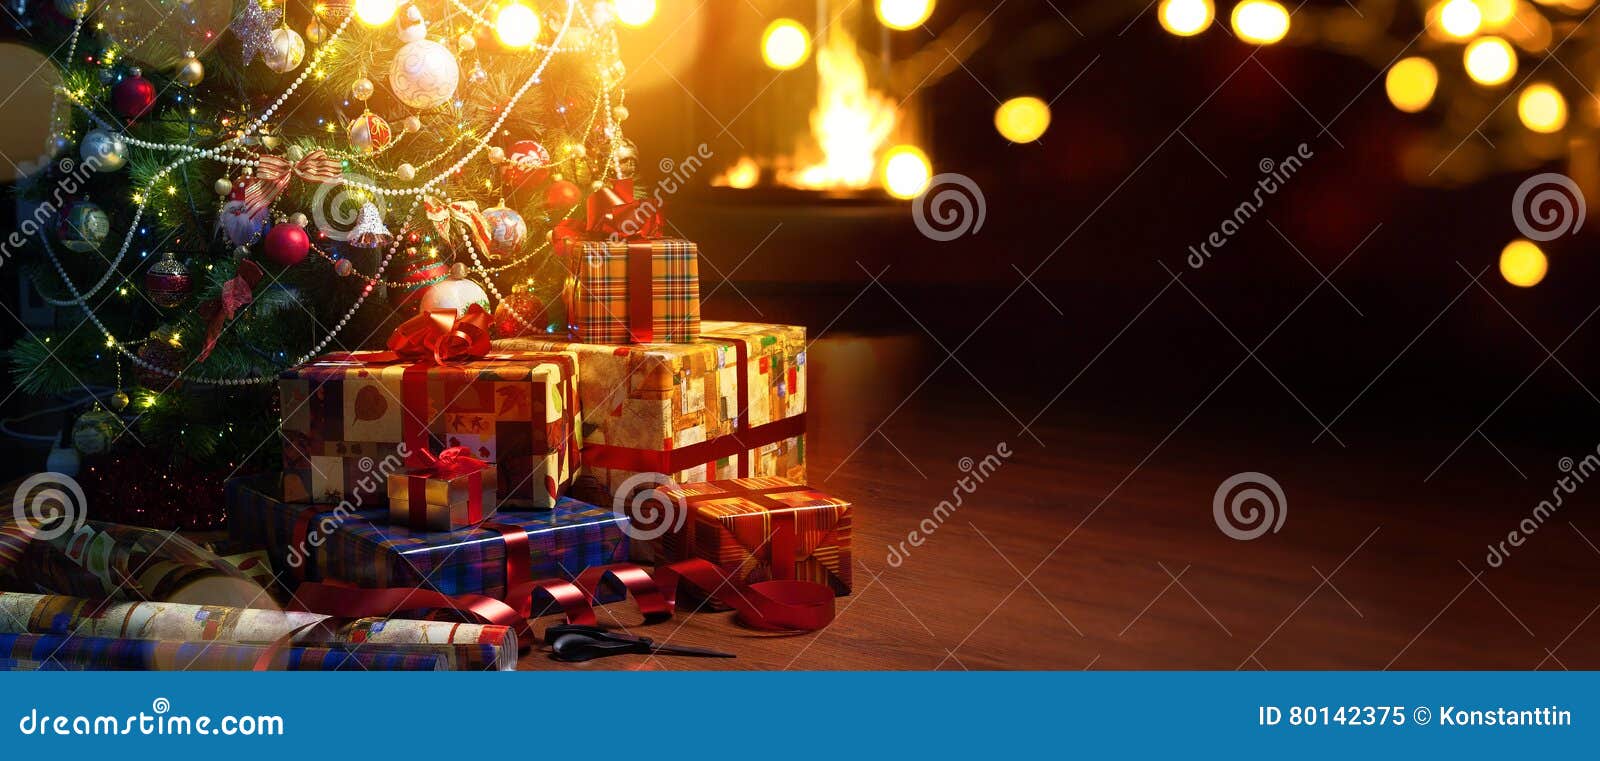 art christmas tree and holidays present on fireplace background